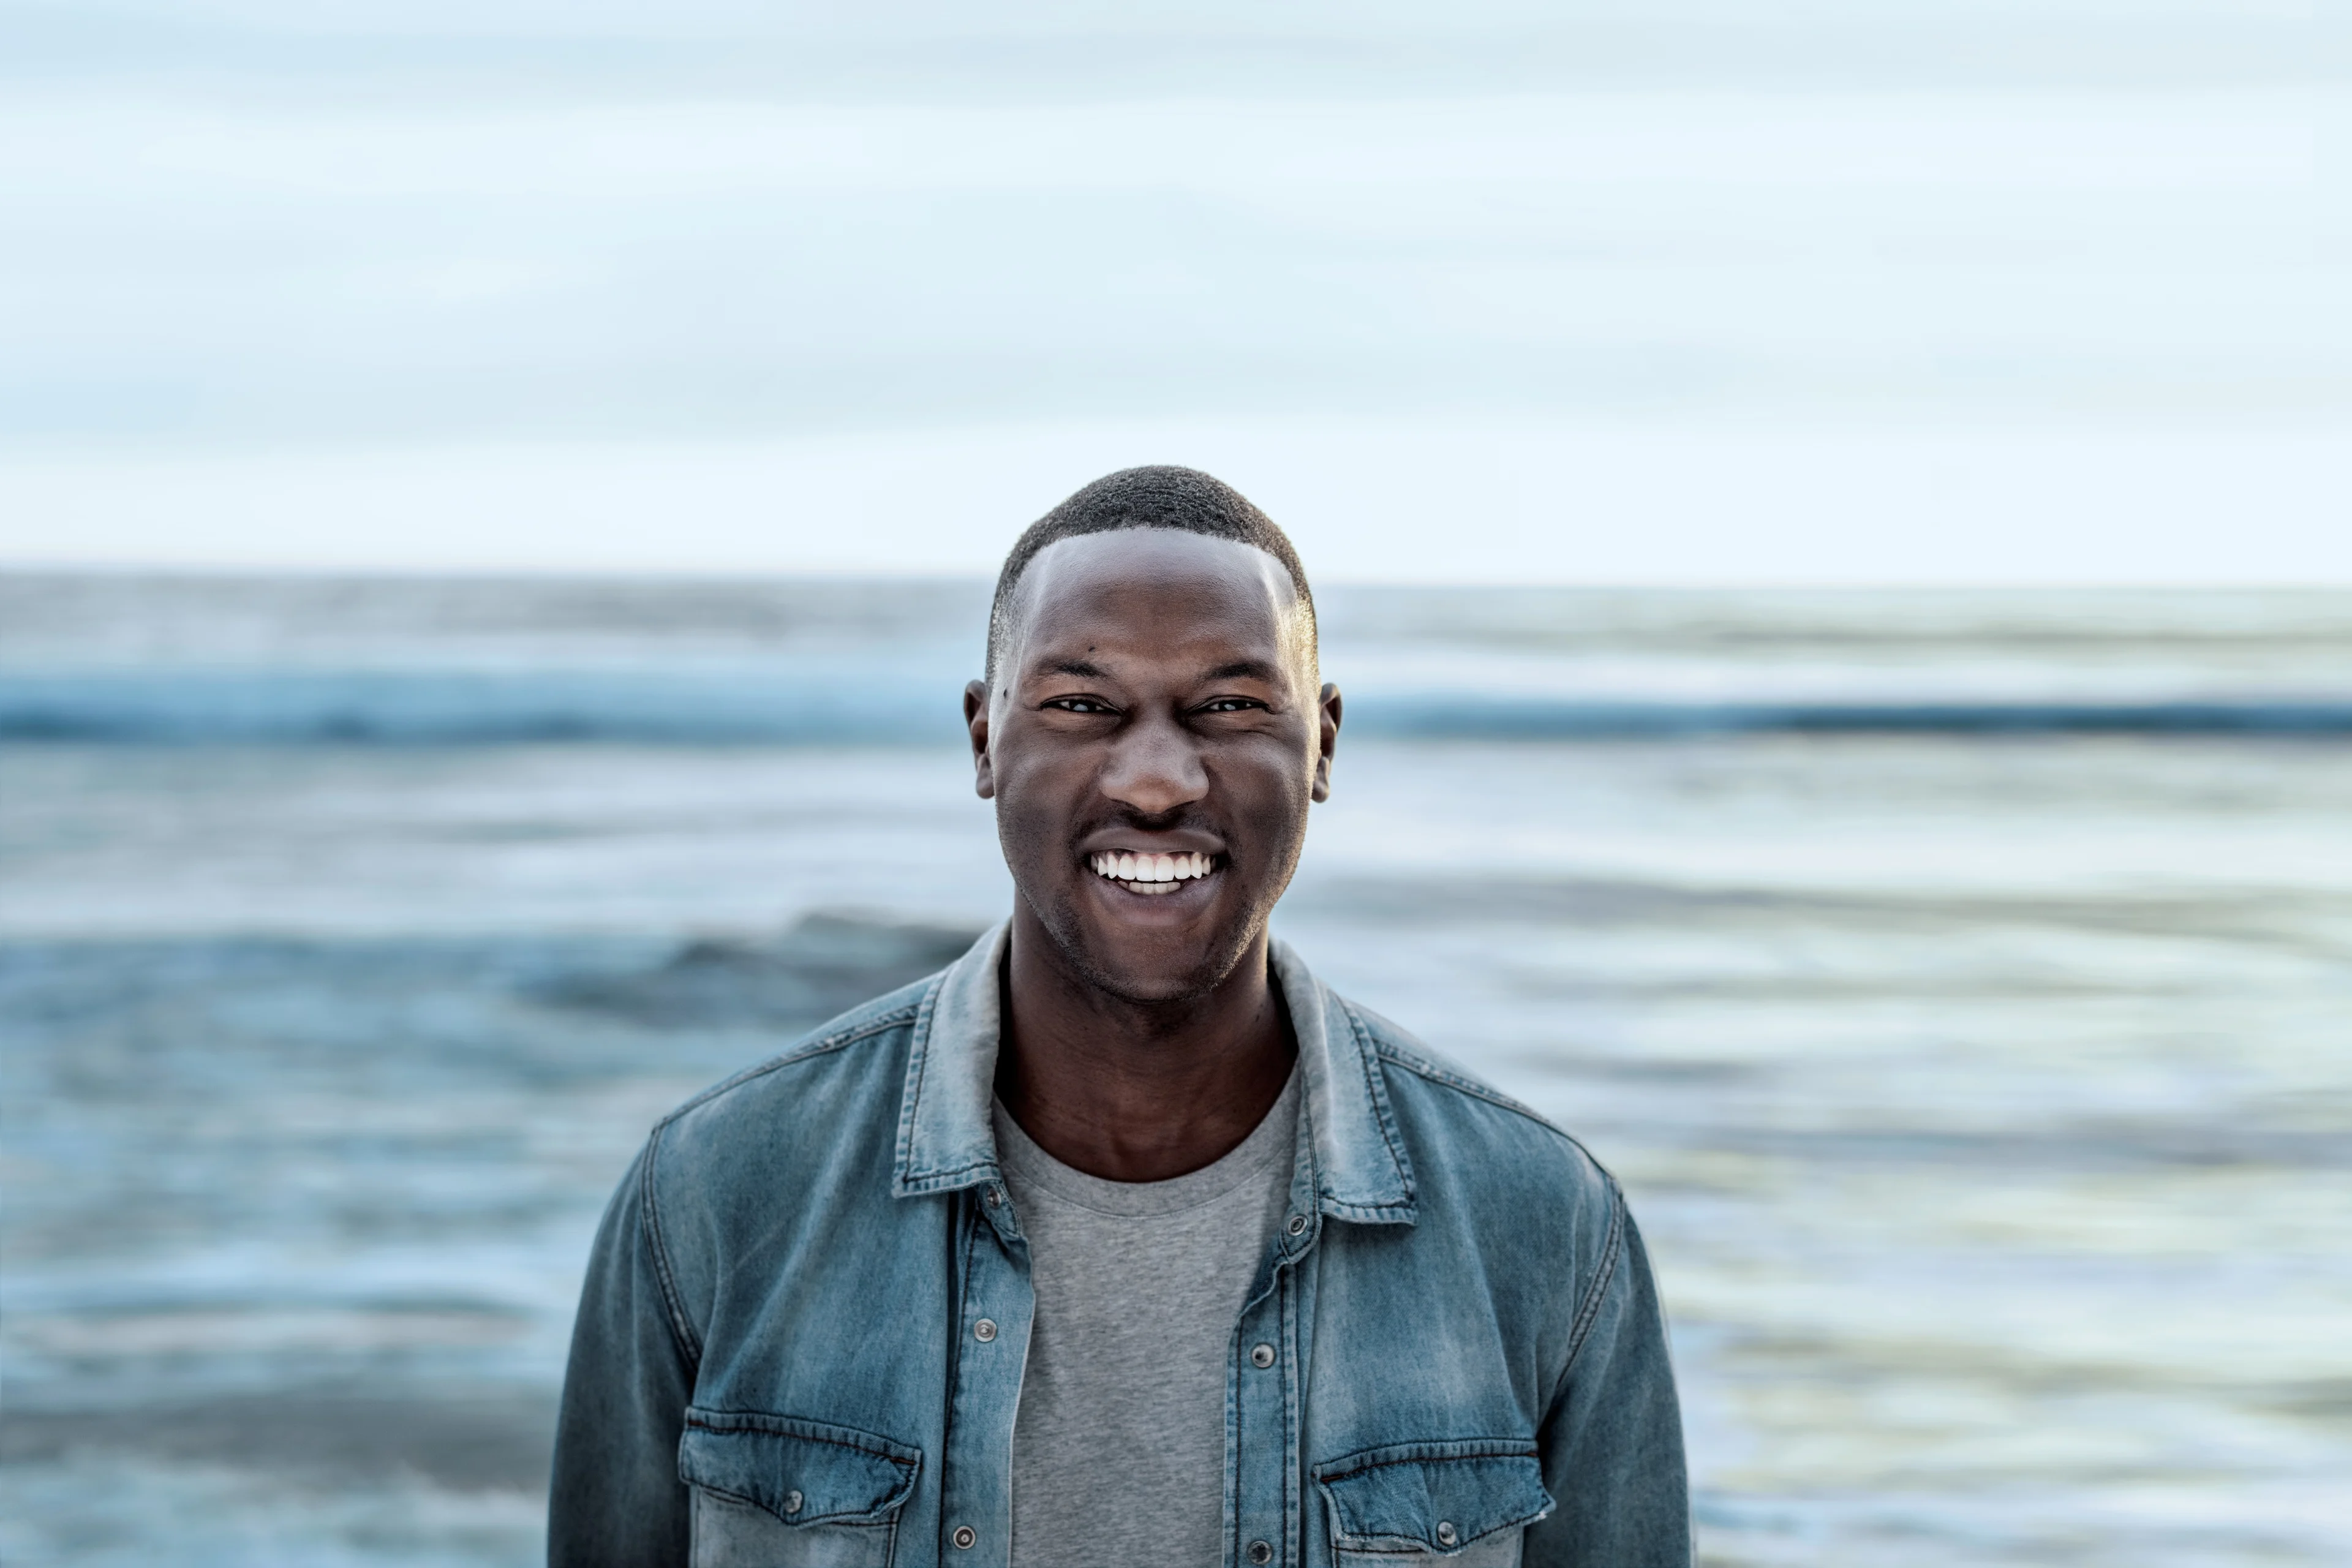 Man smiling by the ocean